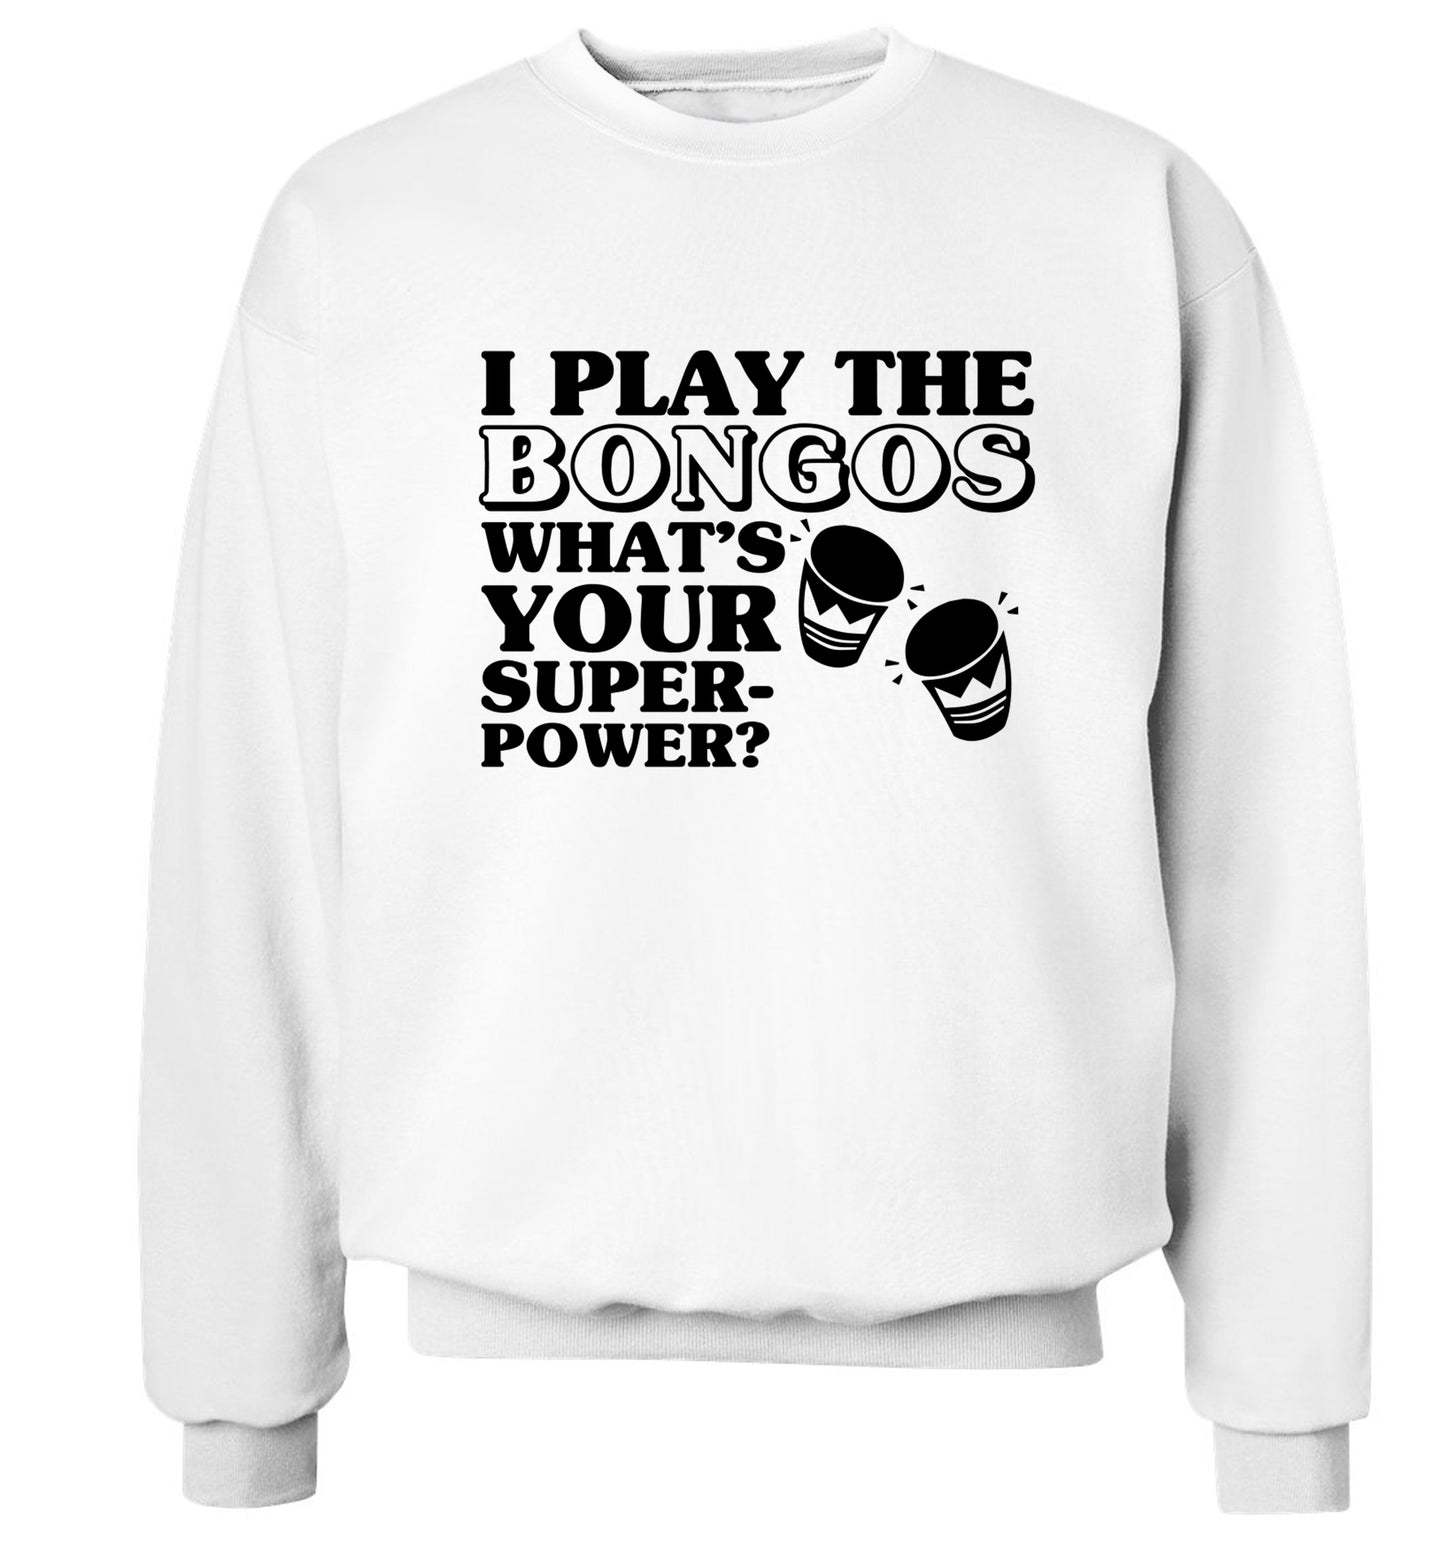 I play the bongos what's your superpower? Adult's unisexwhite Sweater 2XL